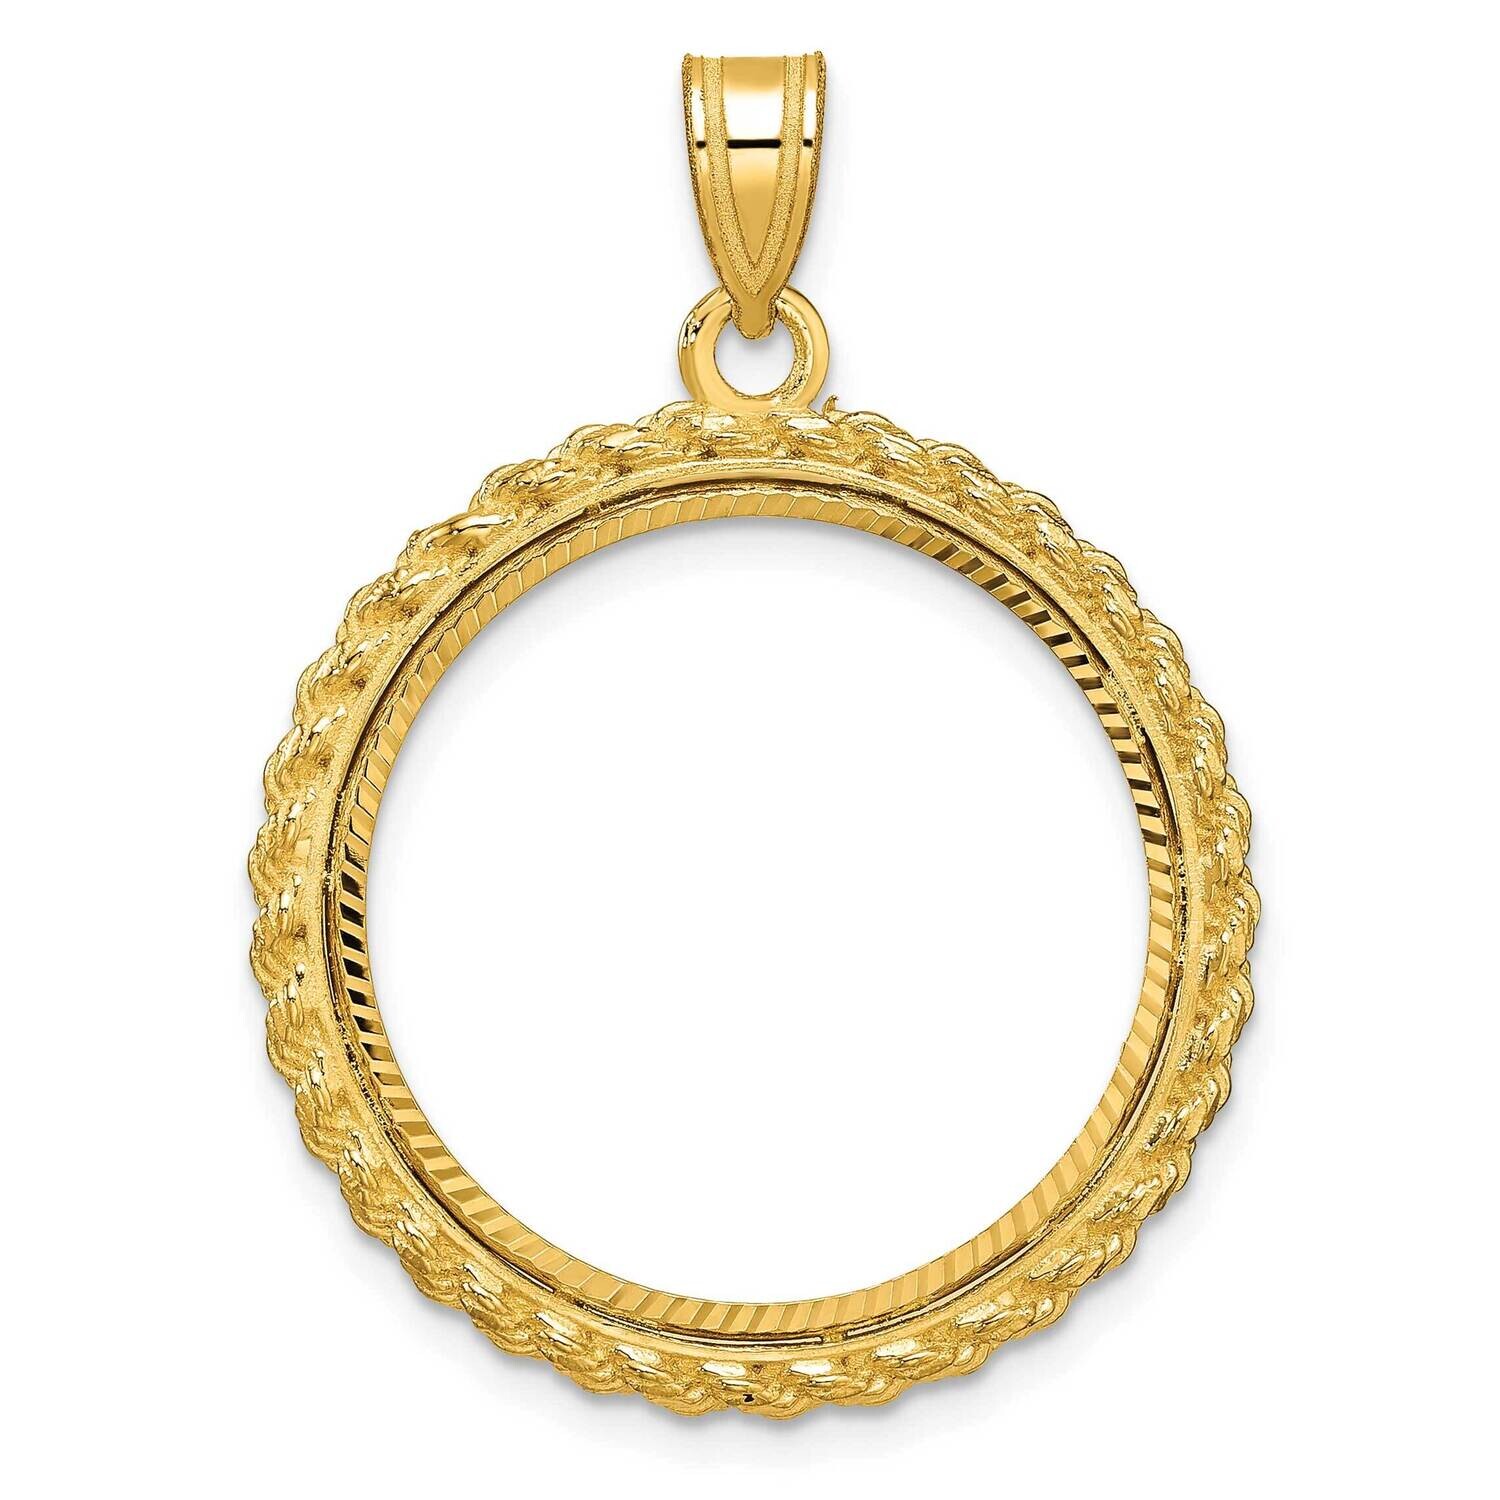 Diamond-Cut Casted Rope Prong 22.0mm Coin Bezel Pendant 14k Gold C8186/22.0